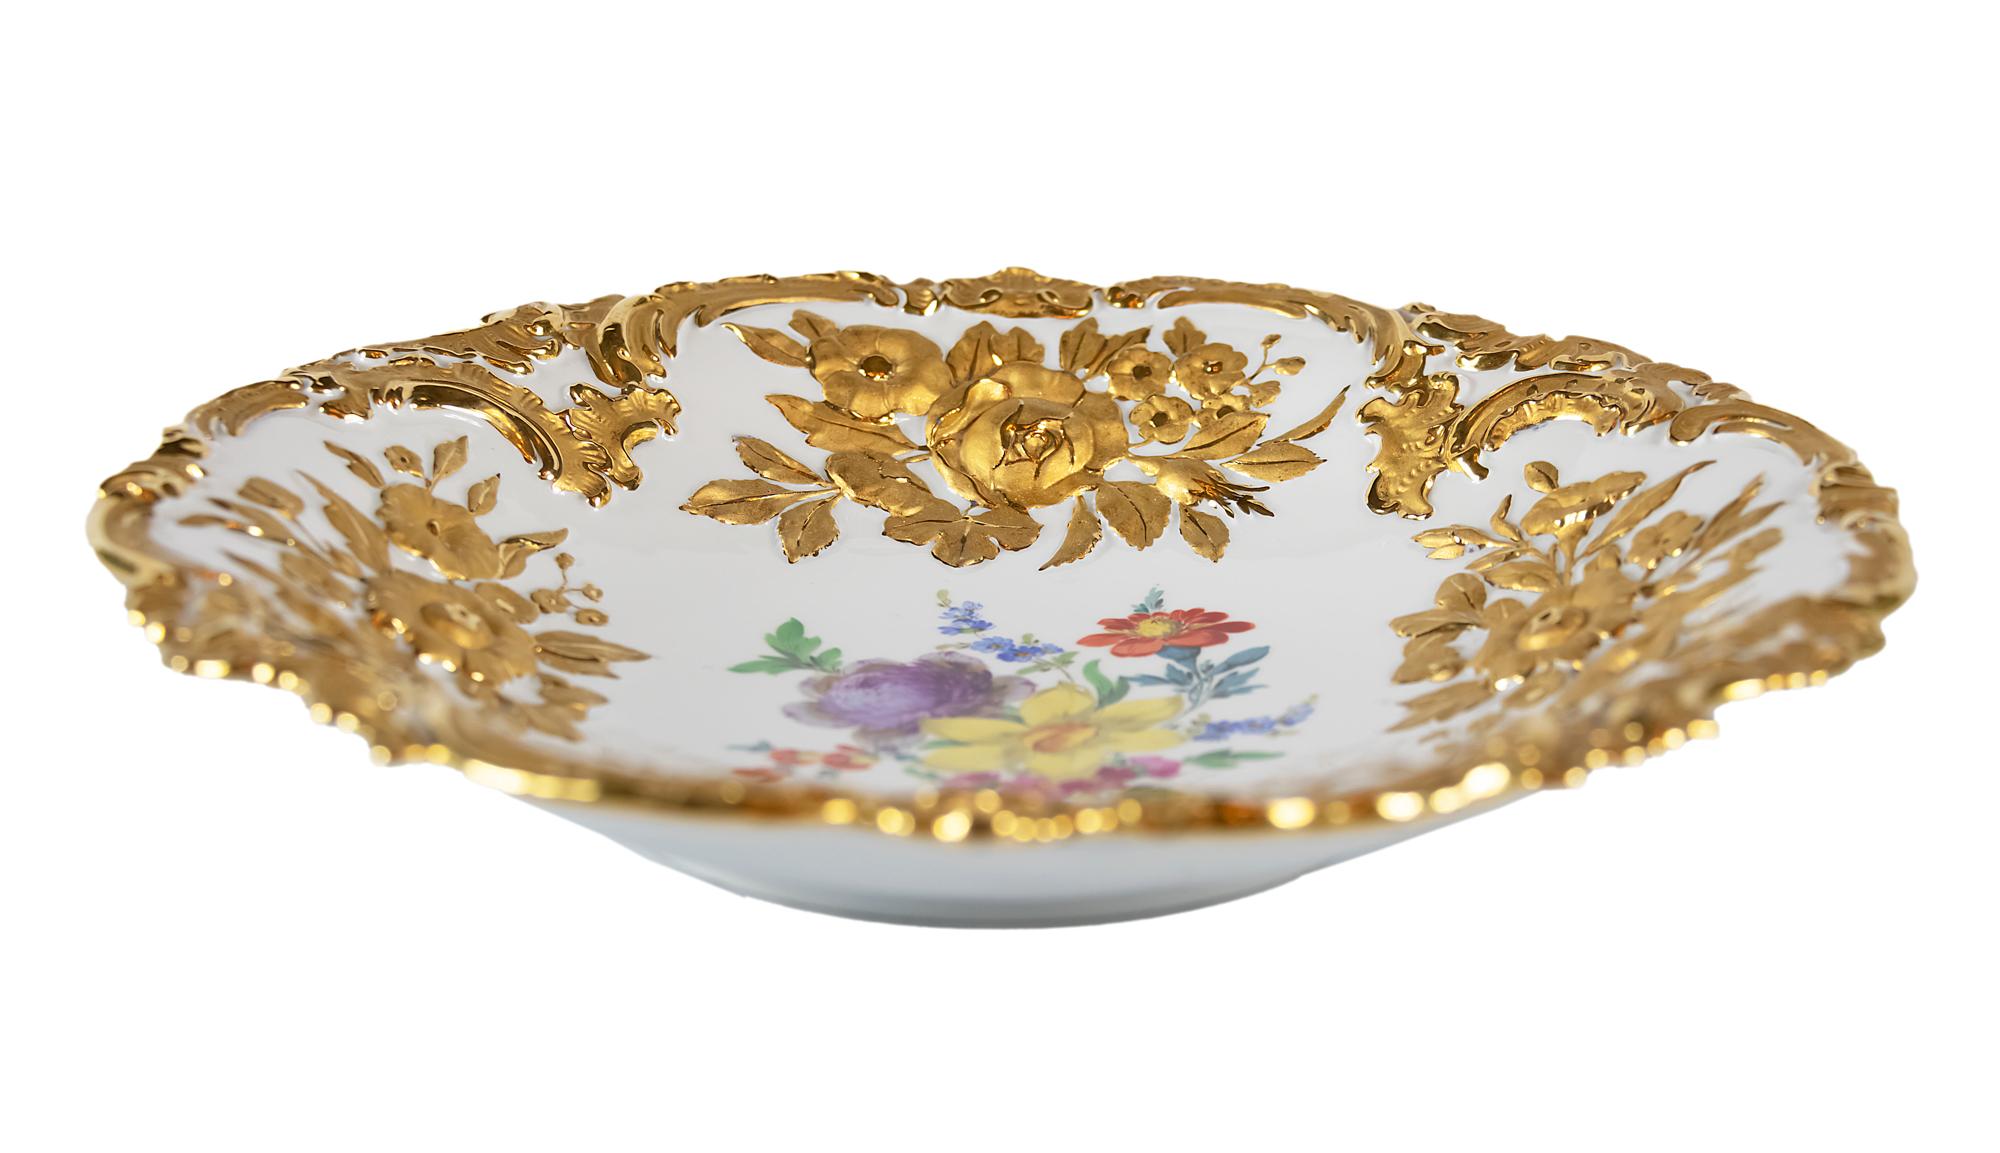 Meissen porcelain deep plate with hand painted relief floral motives and rich gold decor.
 